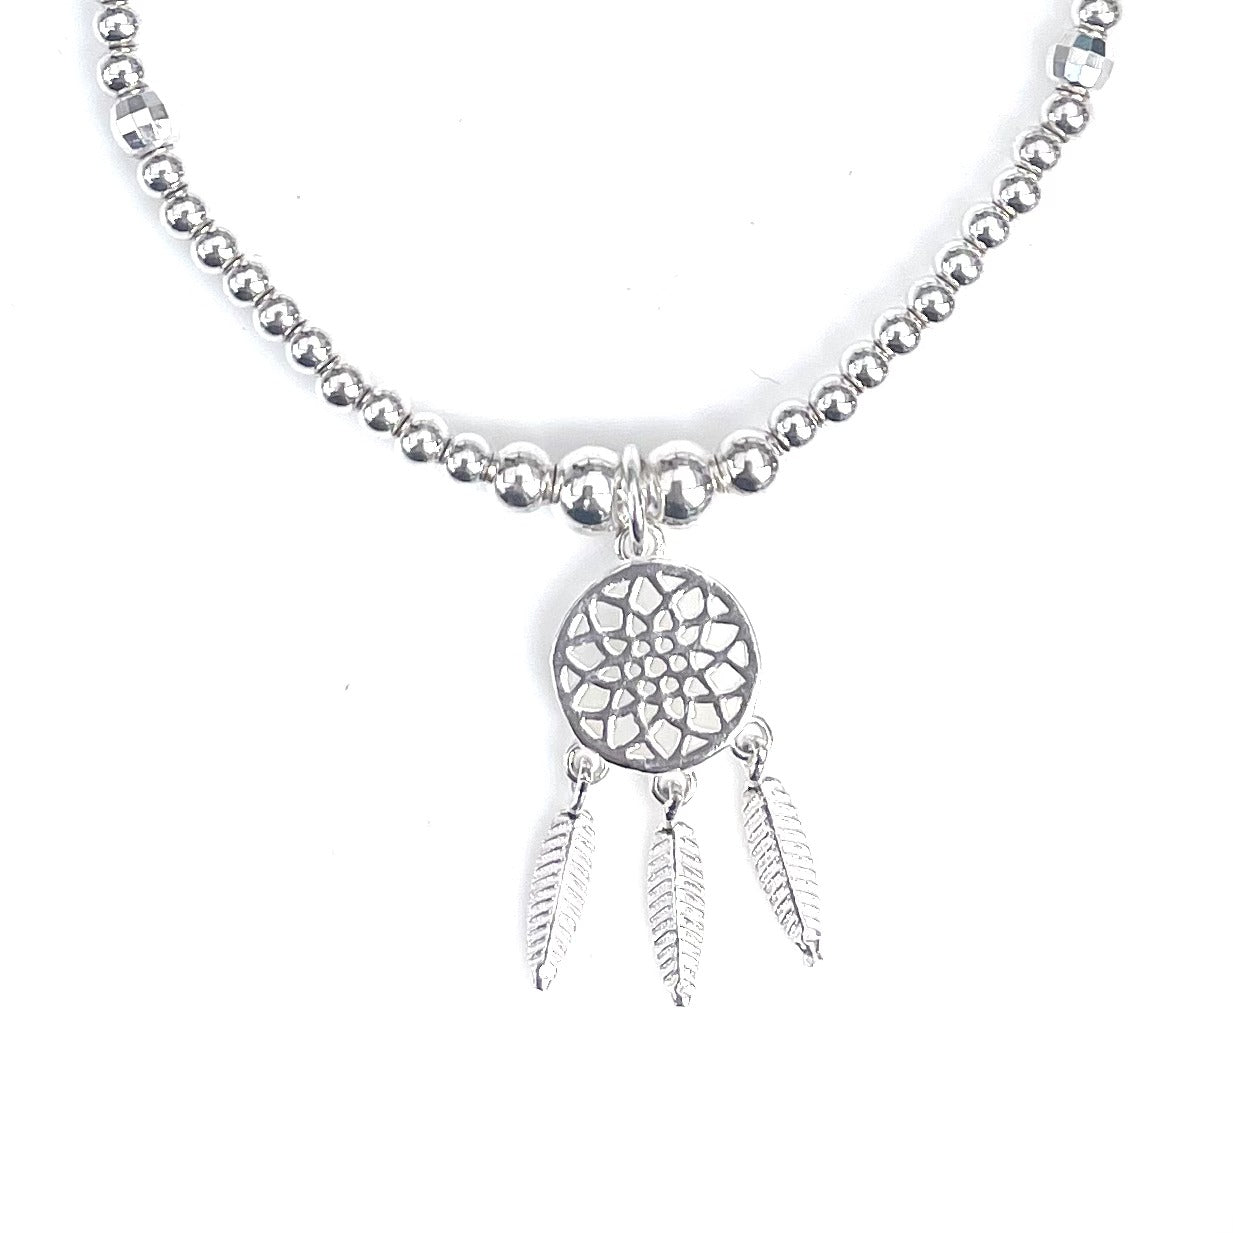 Silver Stretch Stacking Bracelet with Dreamcatcher Charm